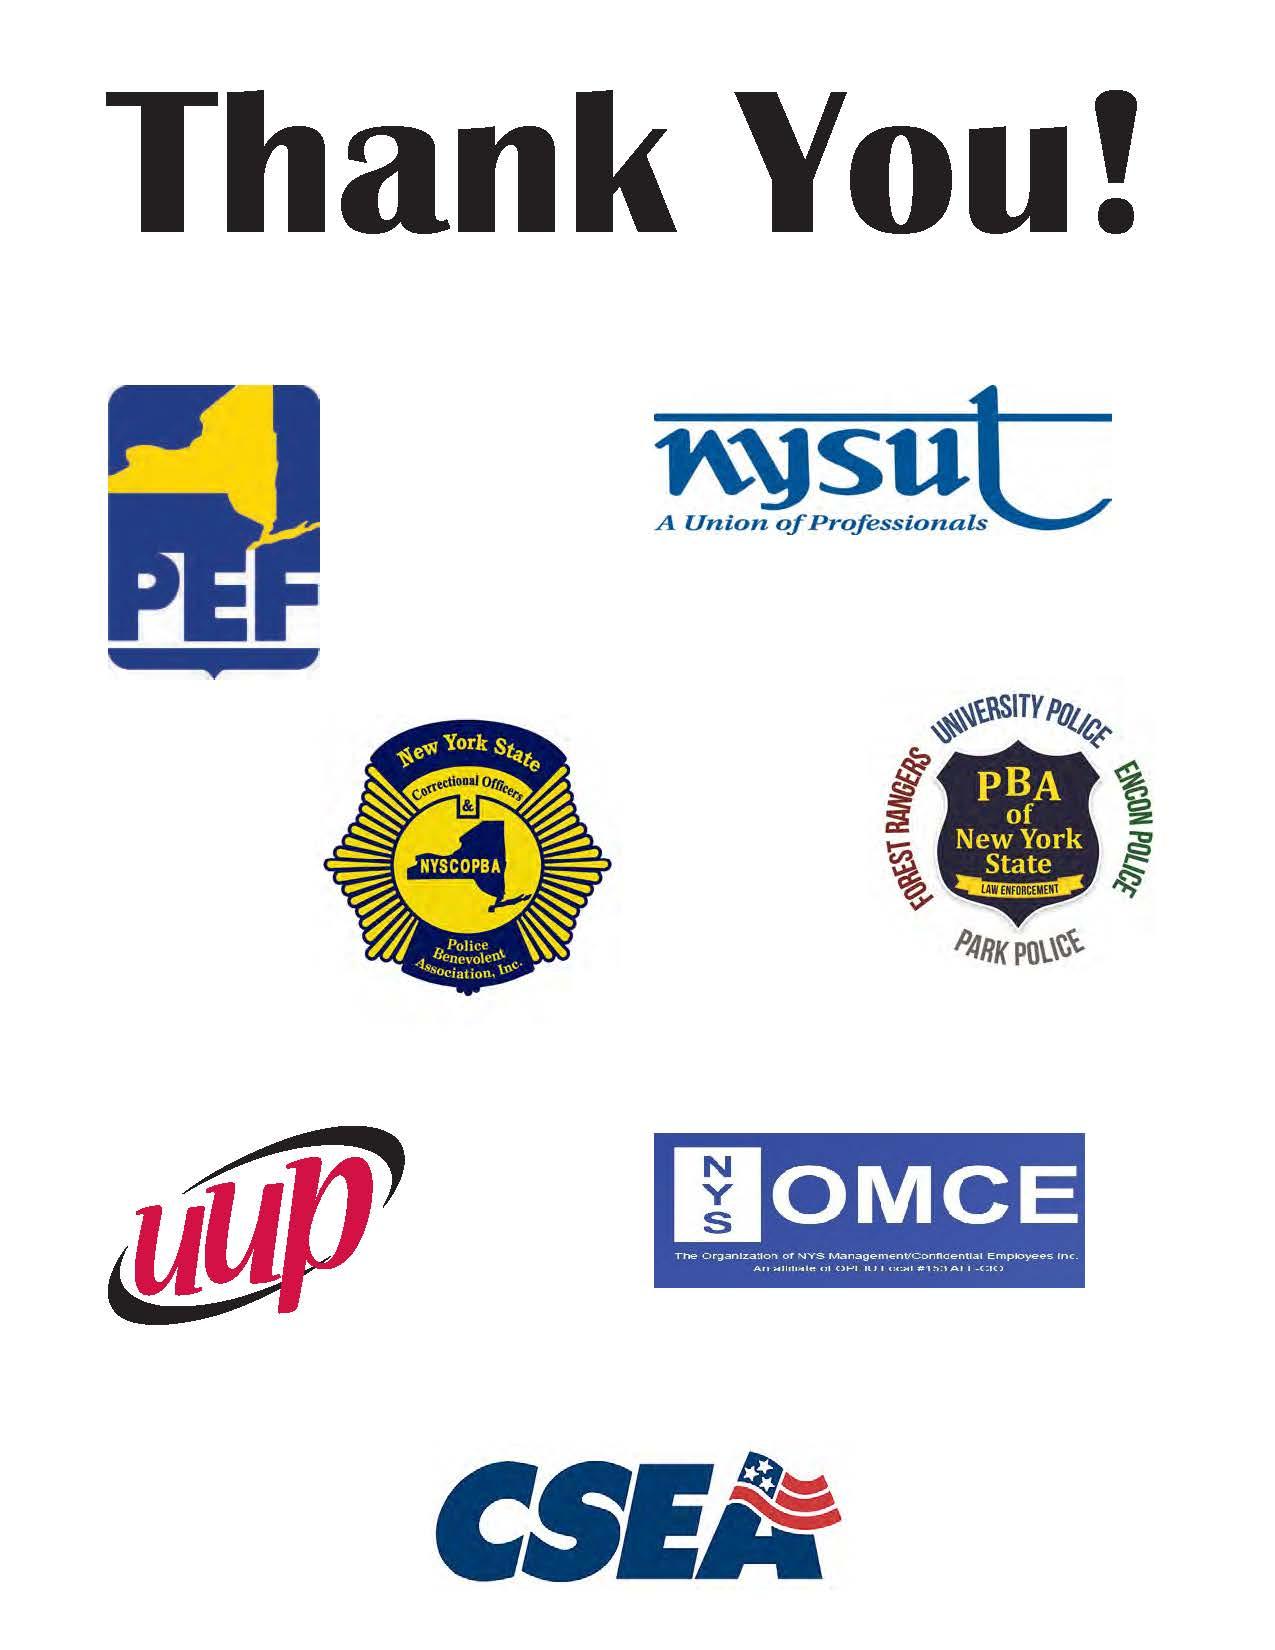 Campus Unions Say Thank You for Your Contribution!